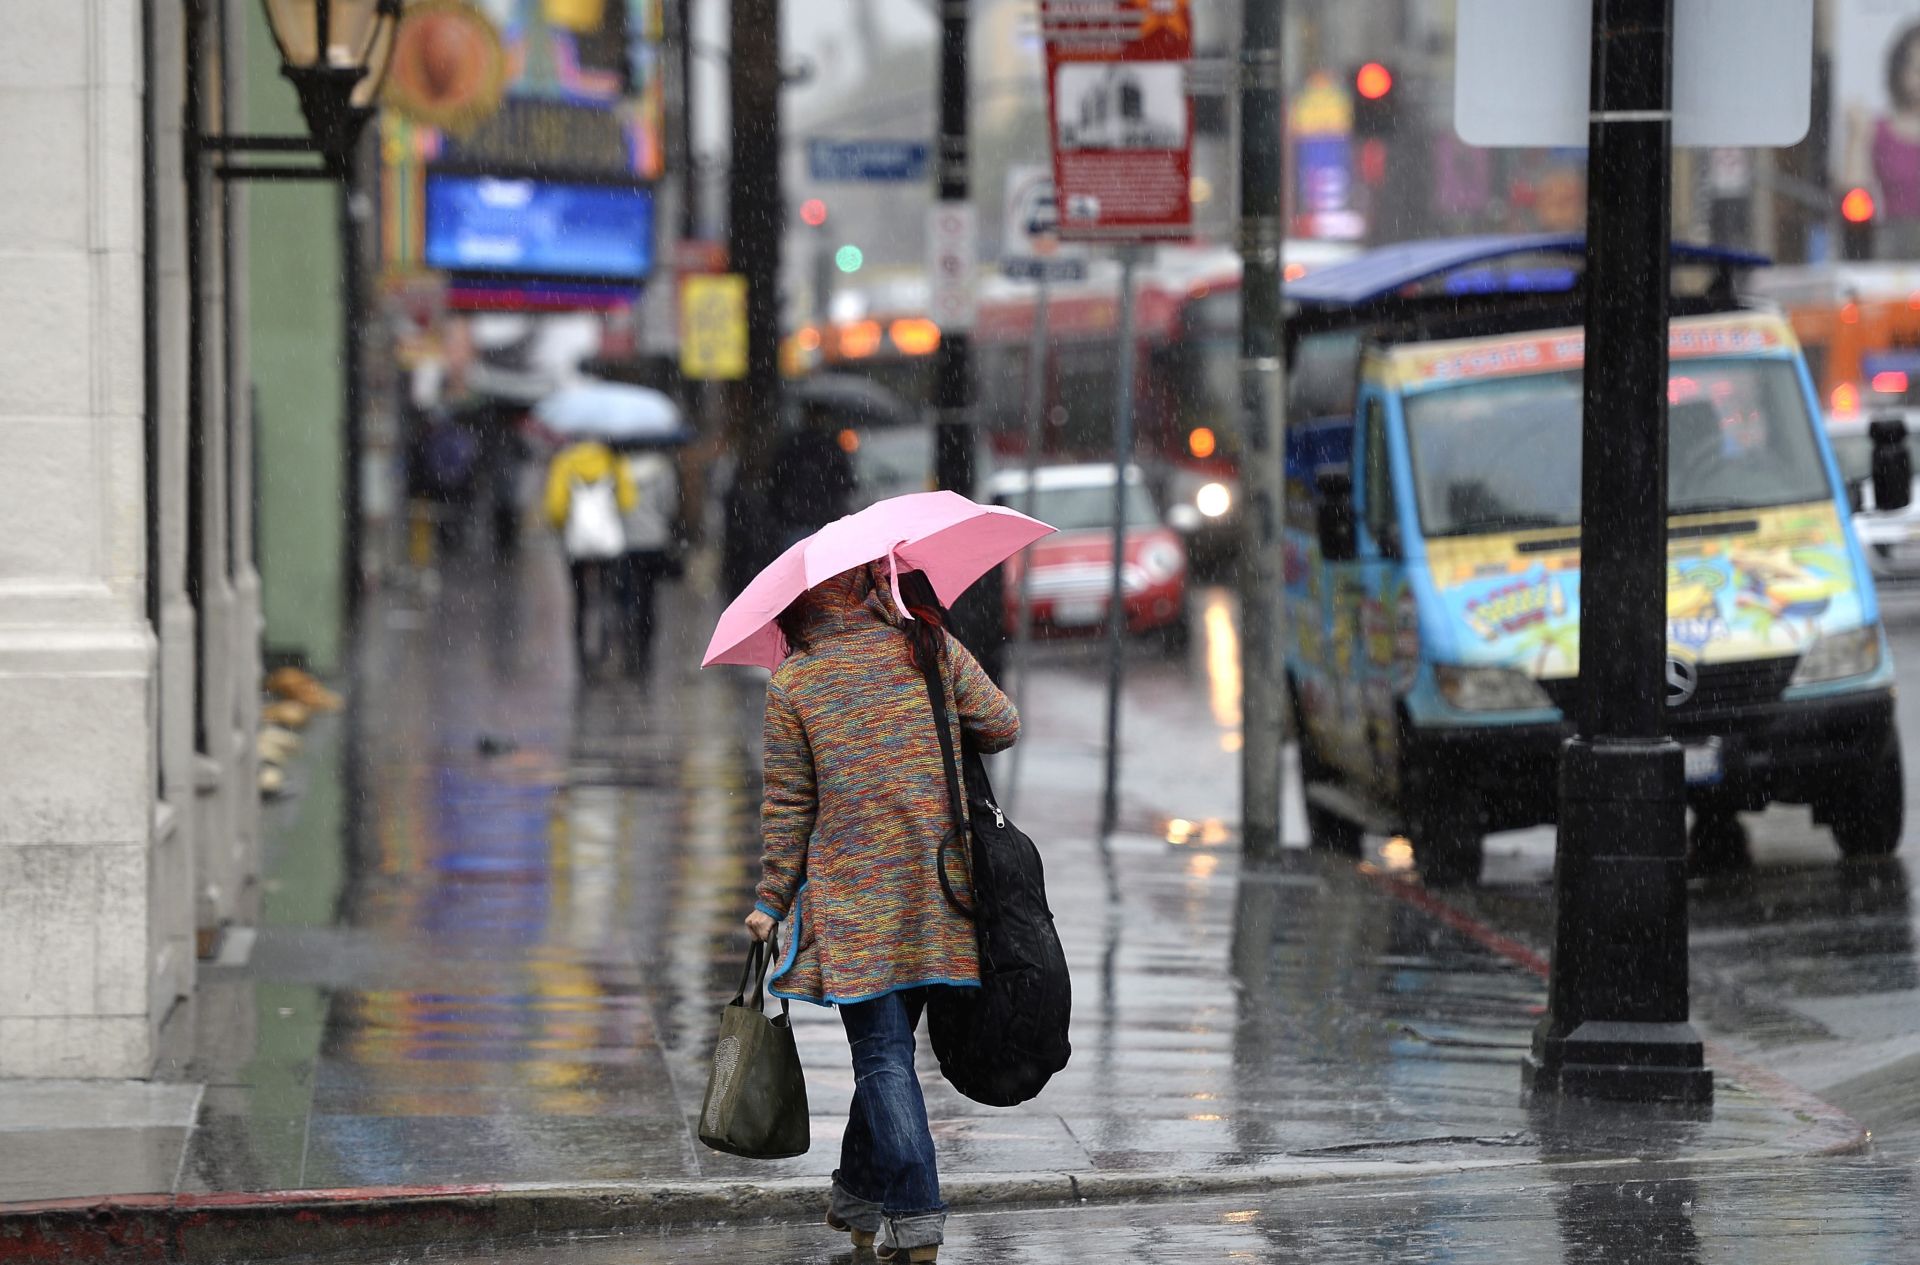 epa05090609 A woman tries to stay dry as she walks  down Hollywood Boulevard in Hollywood, California, USA, 06 January 2016. A series of El Nino generated rain storms which are sweeping through California. Flood watches and concern for debris flows in areas affected by fires has residents and emergency personnel on alert.  EPA/MIKE NELSON